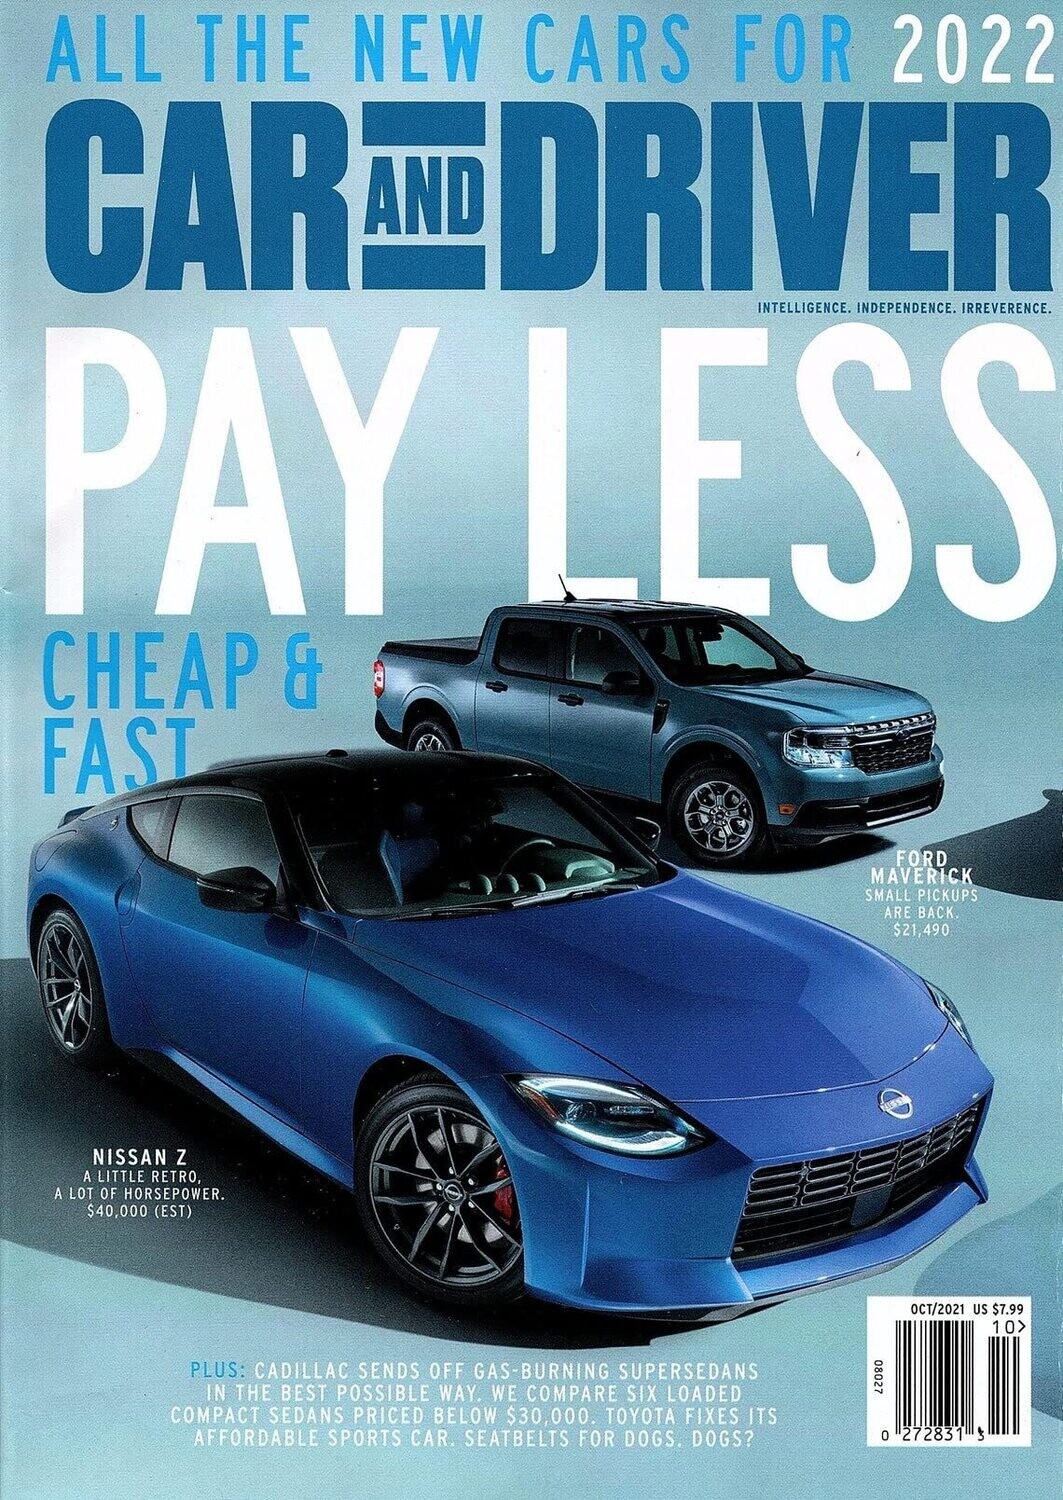 Car and Driver Magazine #10